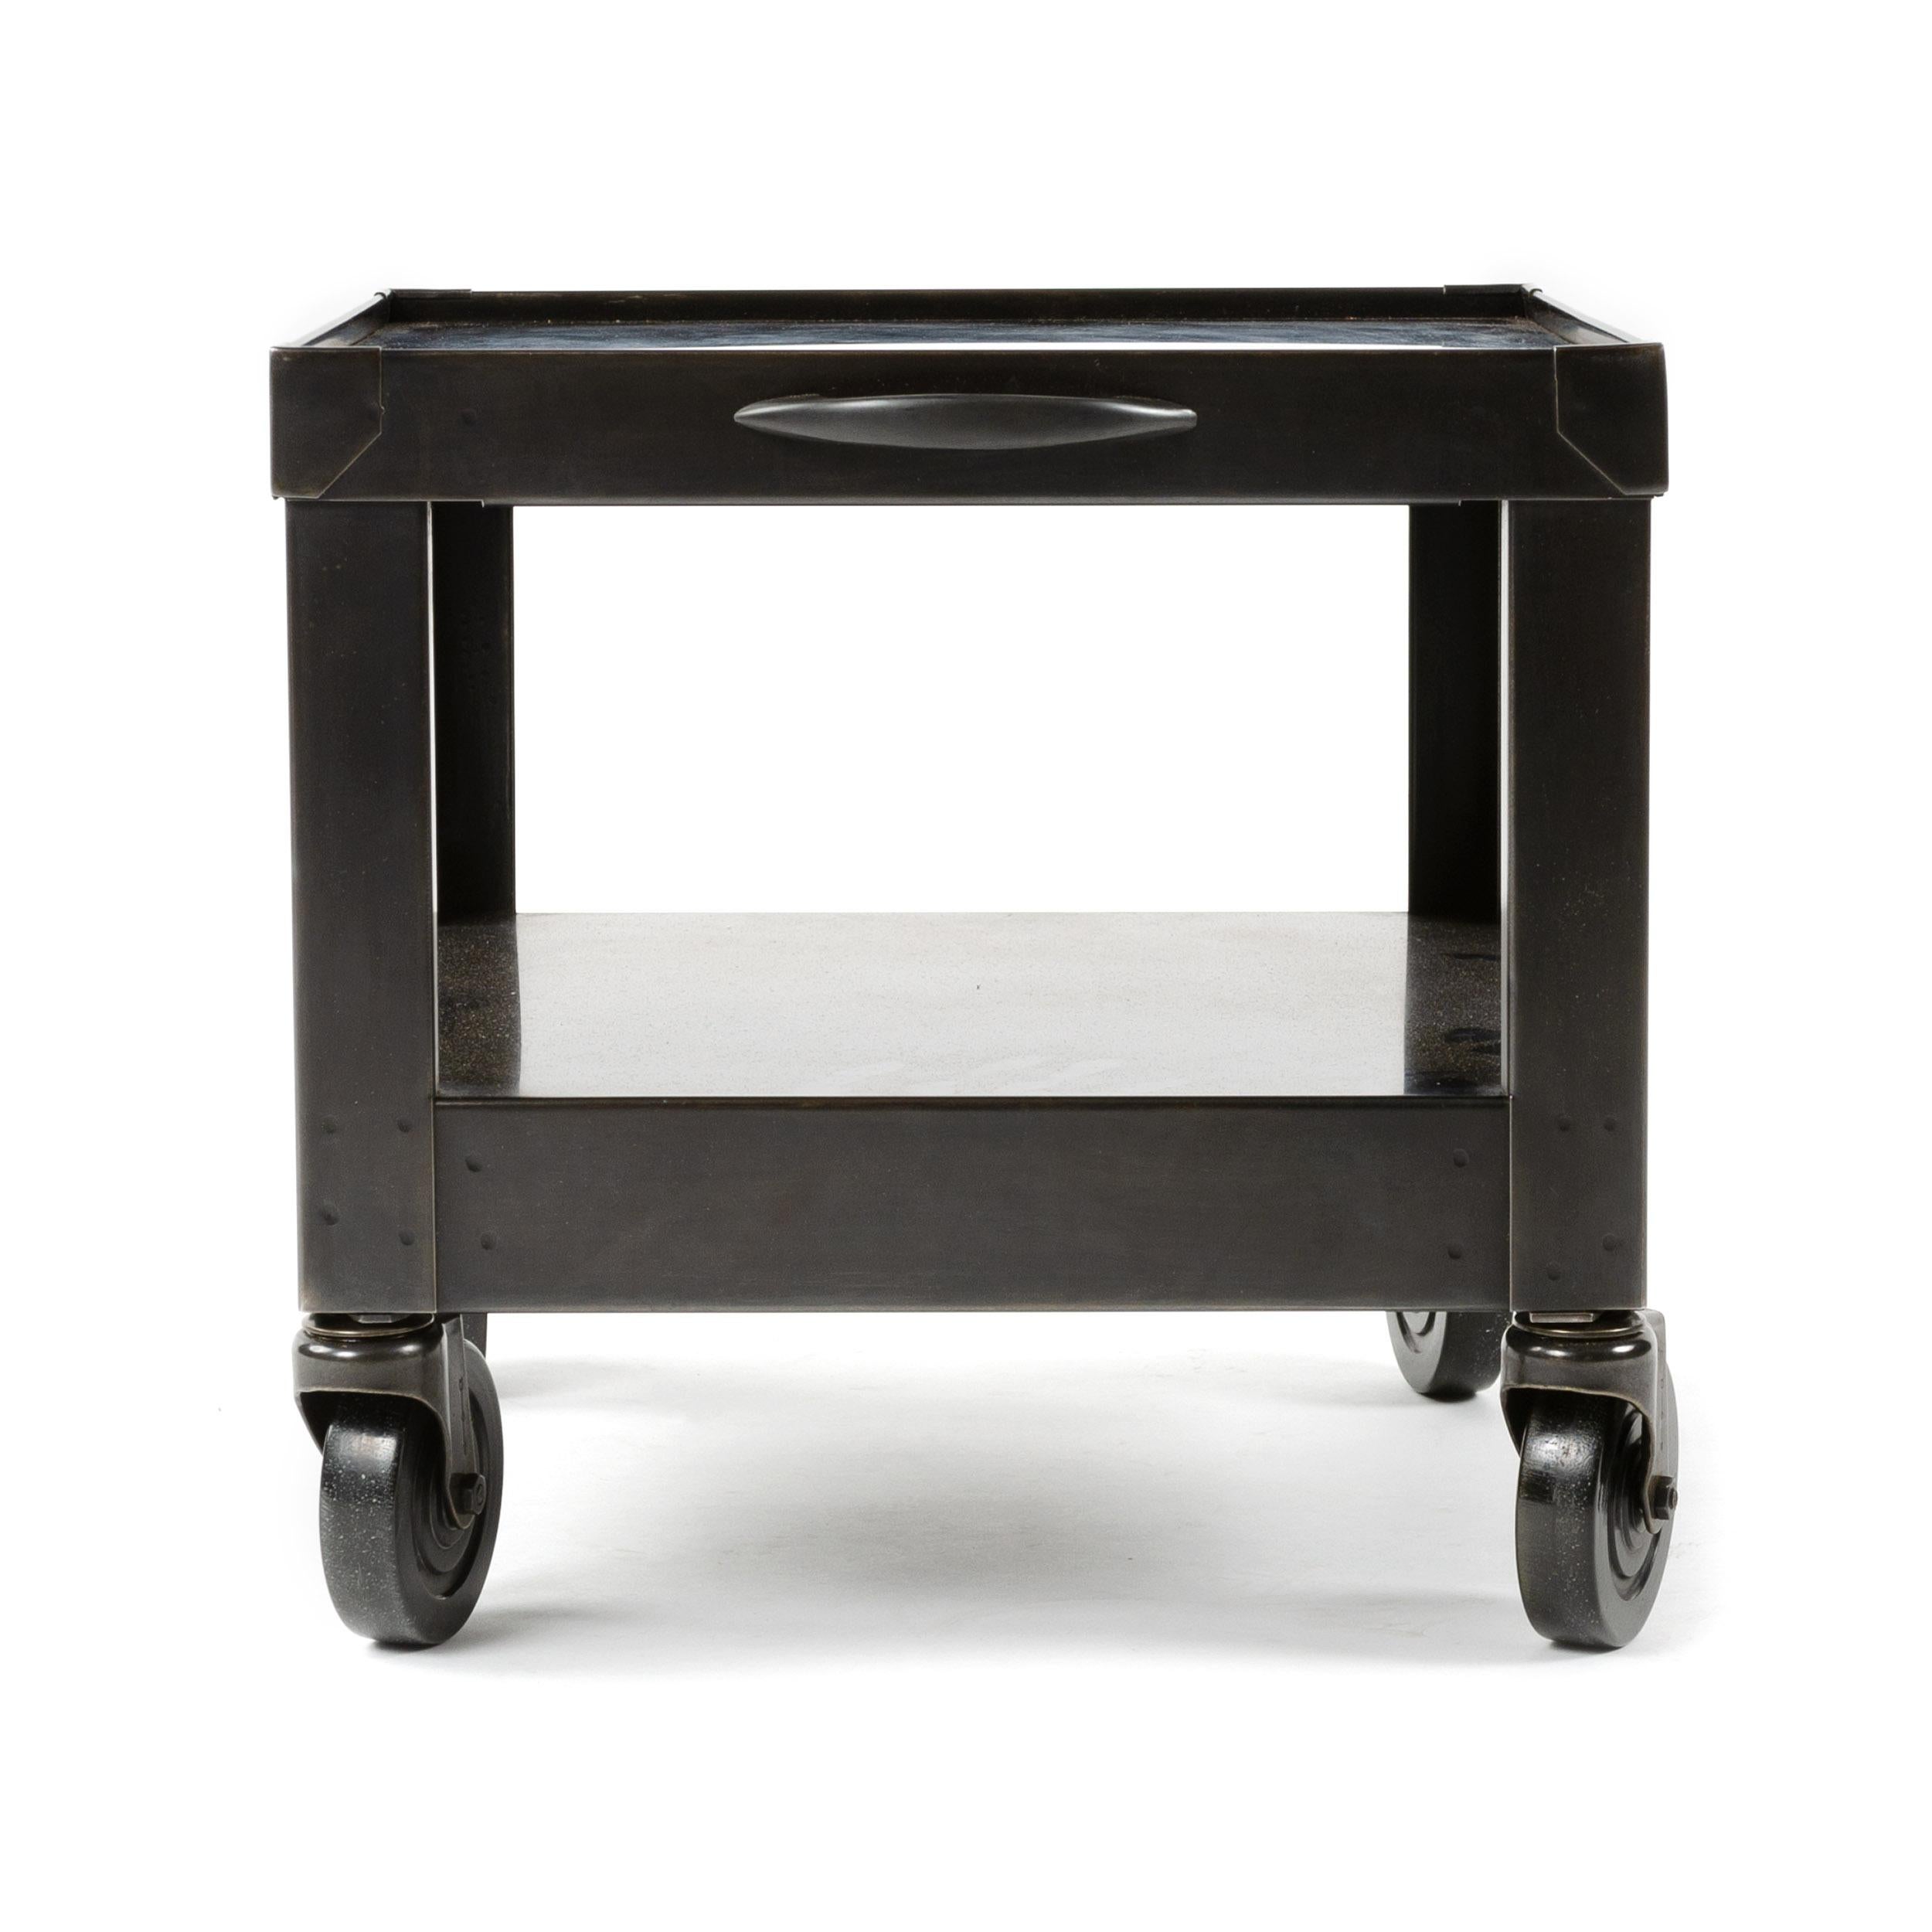 A restored and patinated industrial cart on casters with a lipped edge and handle.